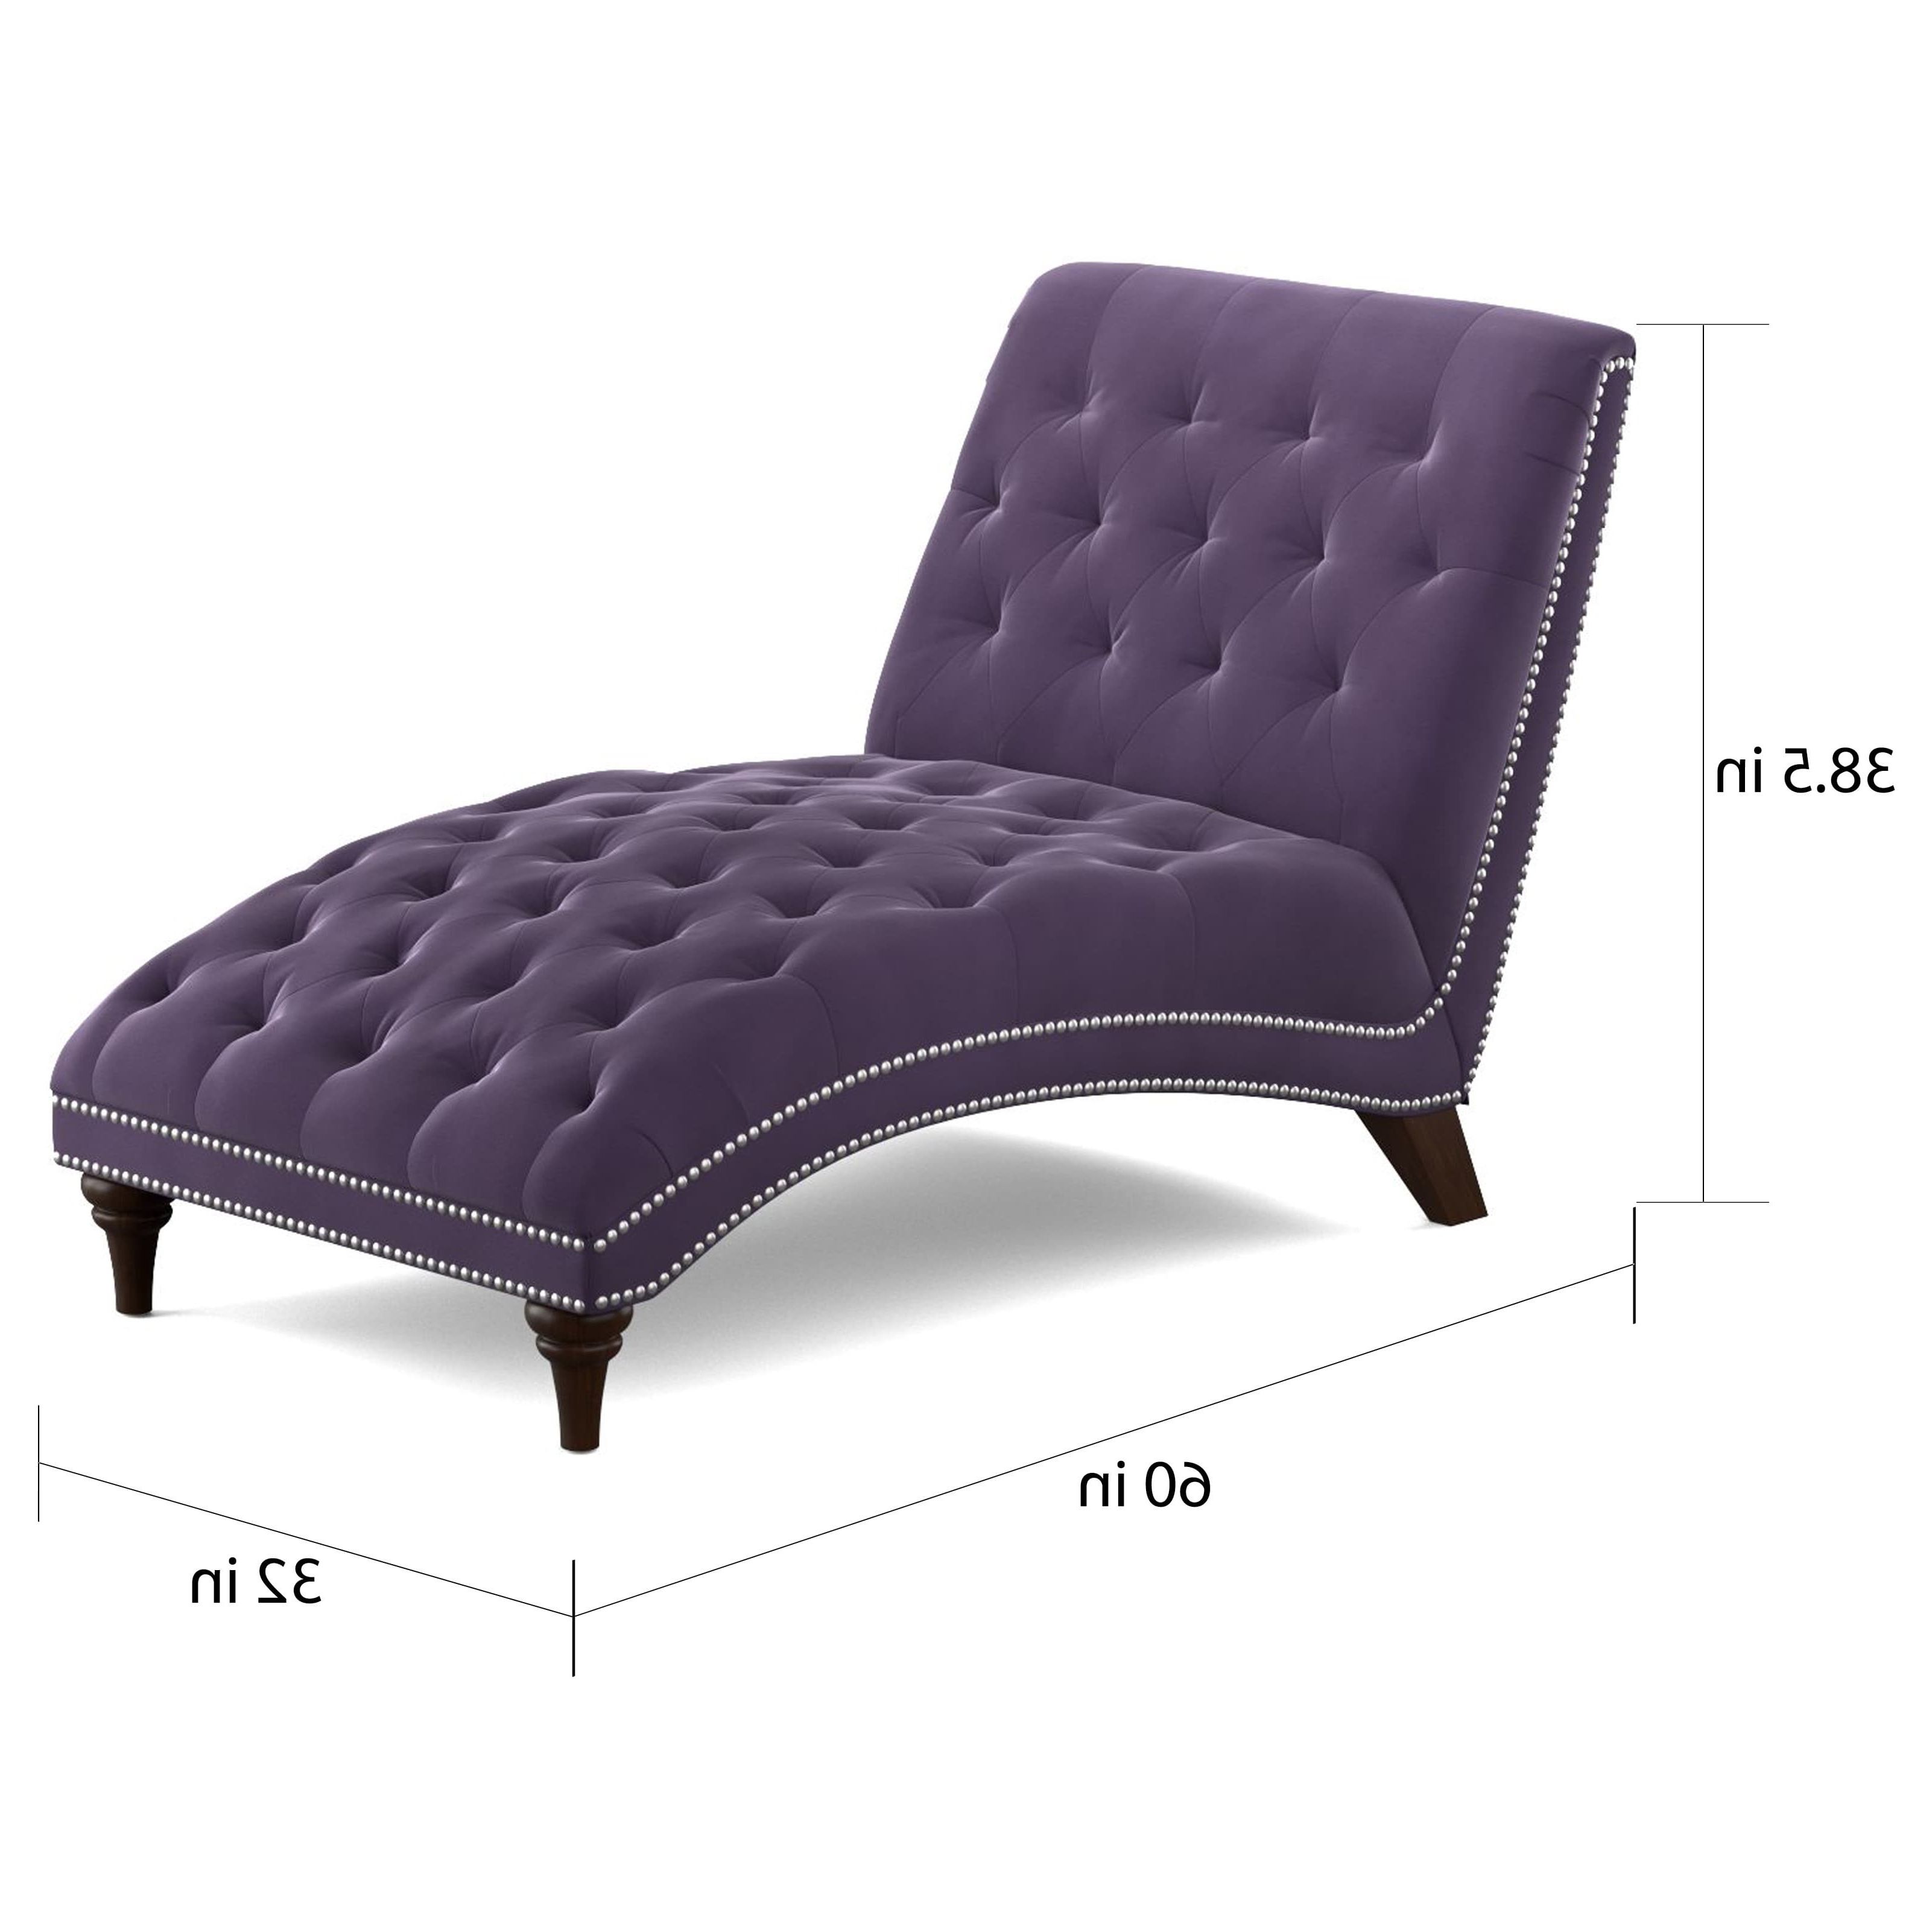 Gracewood Hollow Heliodorus Purple Velvet Chaise Lounge – Free Throughout Most Recently Released Purple Chaise Lounges (View 13 of 15)